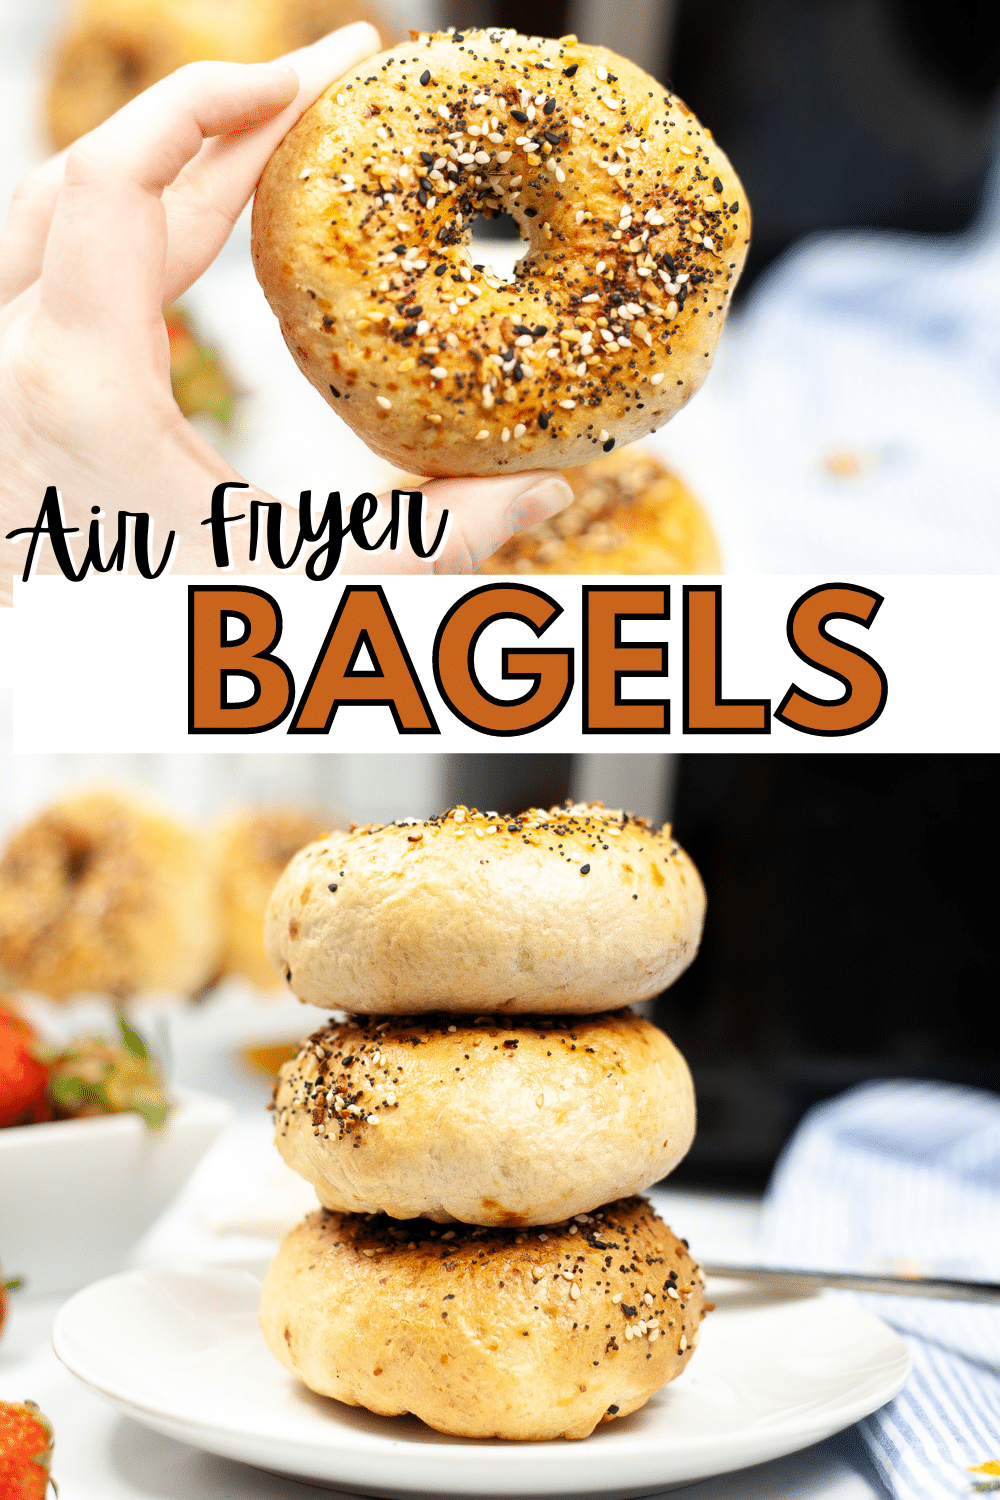 These Air Fryer Bagels are easy to make and come out dense and chewy on the inside with the perfect golden, crispy outside. #airfryer #bagels #breakfast via @wondermomwannab